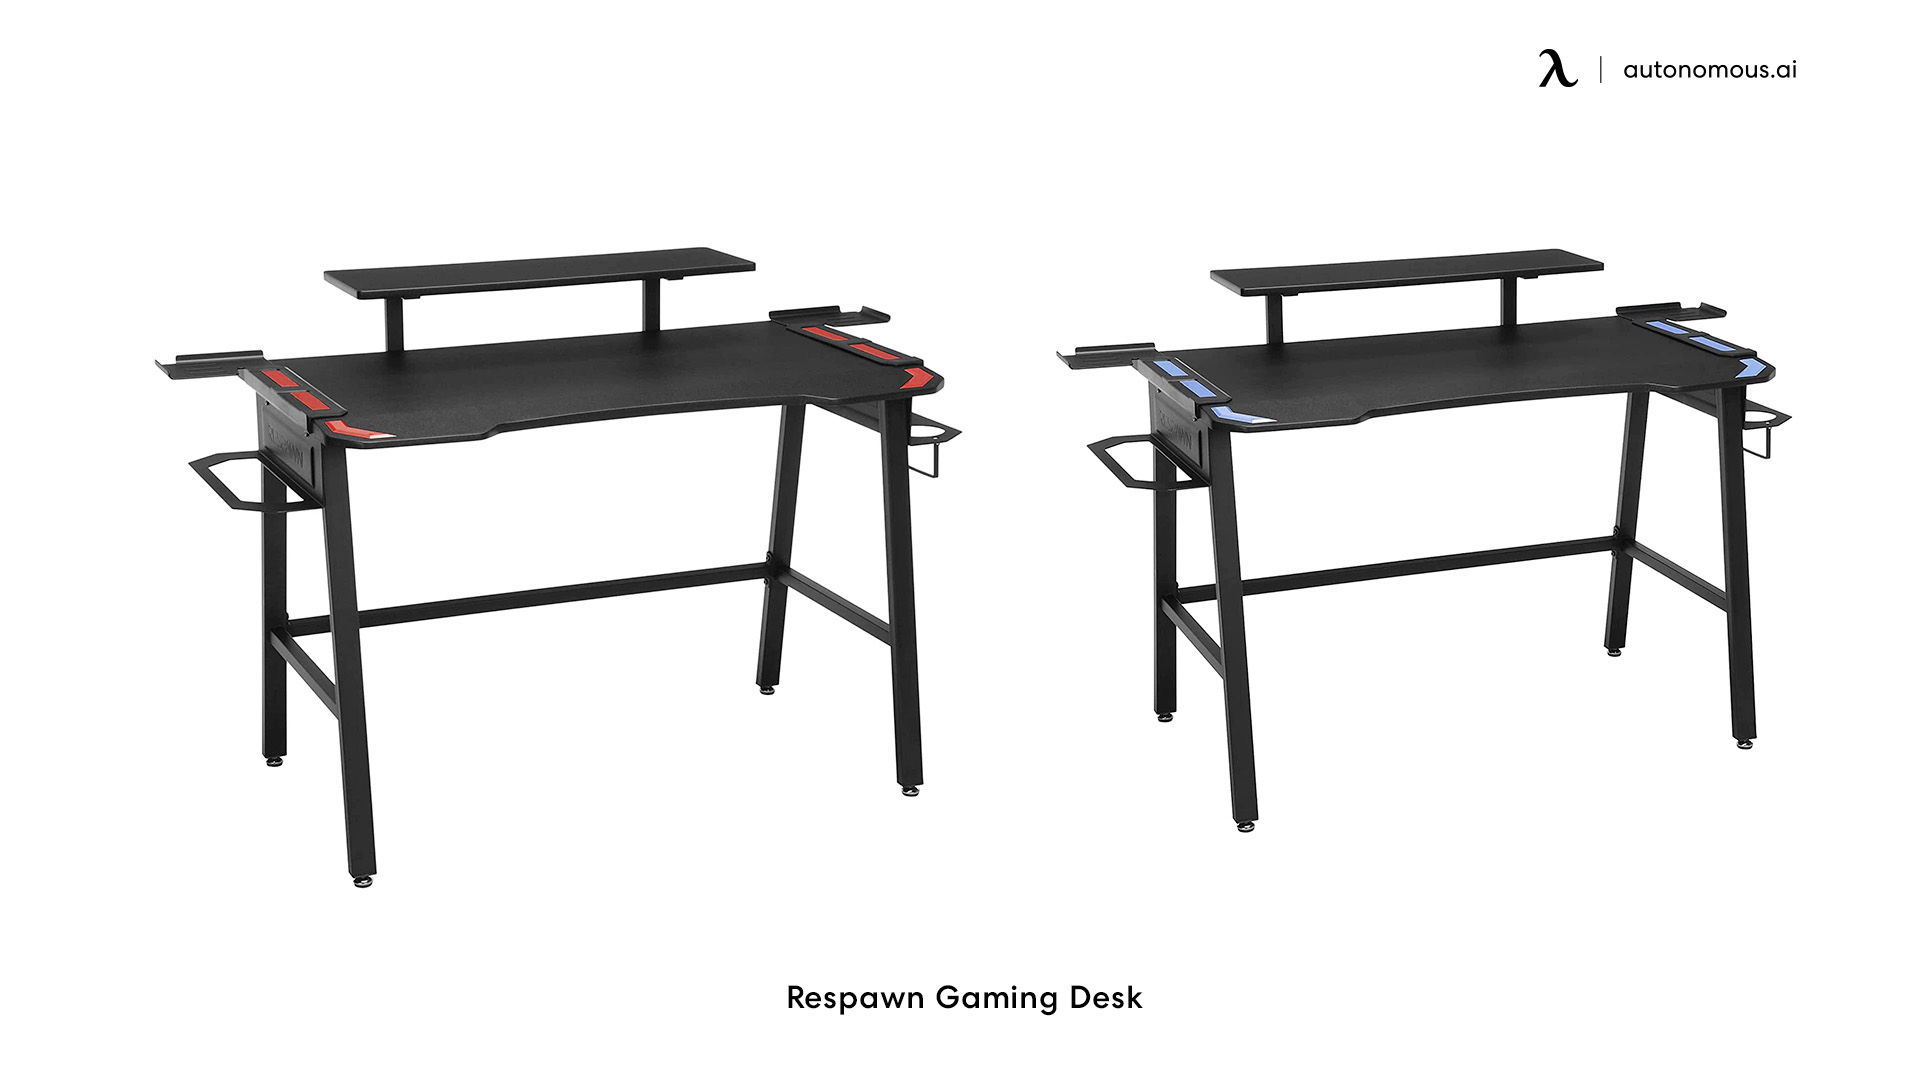 RESPAWN Gaming work from home desks